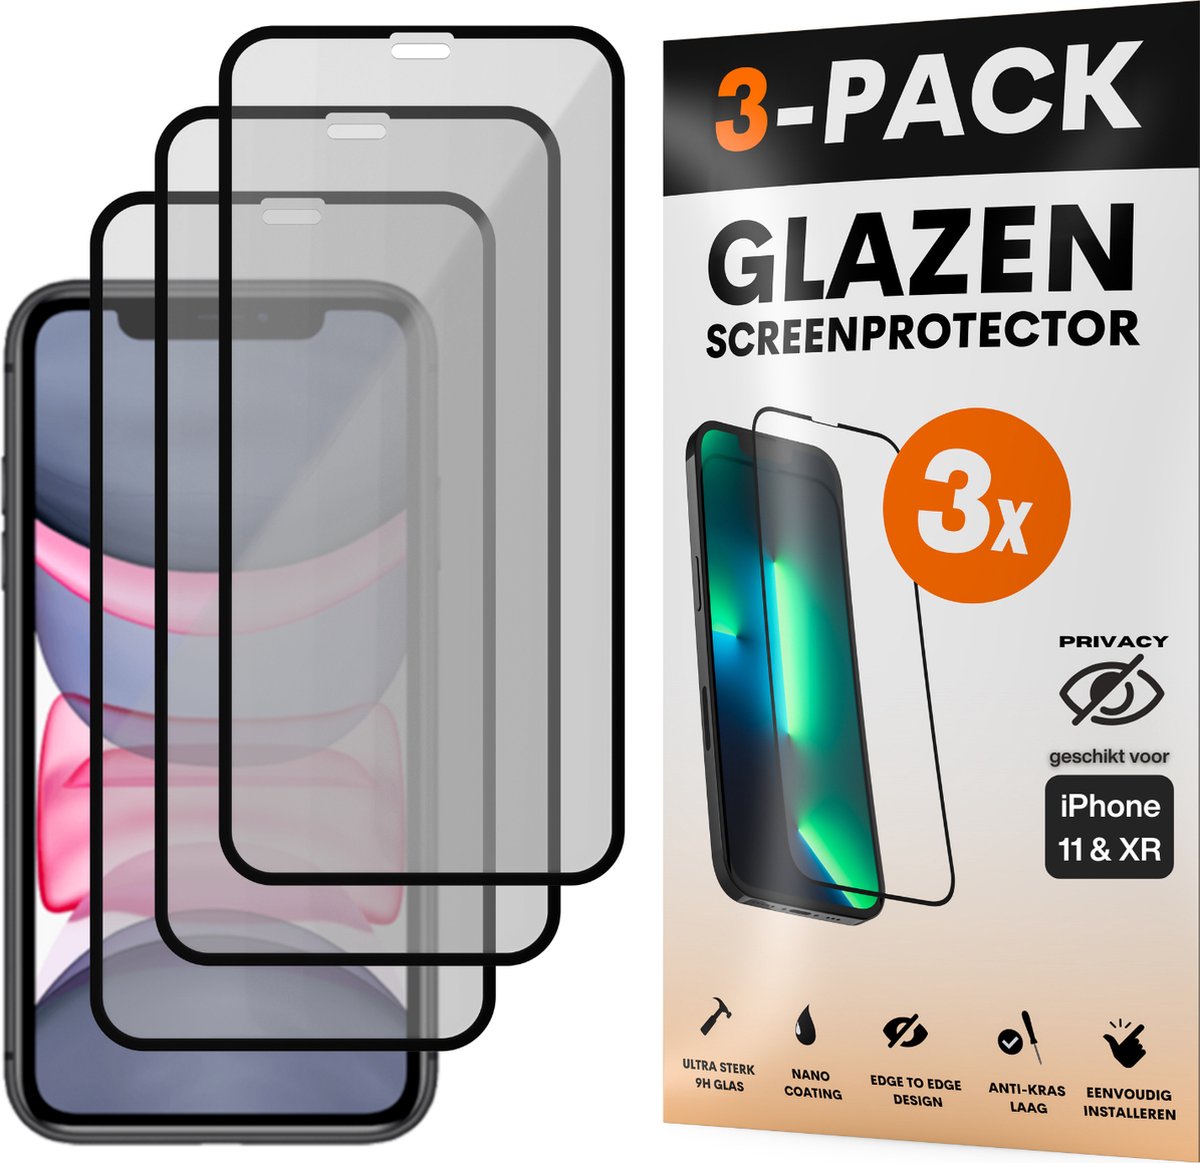 Privacy Screenprotector - Geschikt voor iPhone 11 / XR - Gehard Glas - Full Cover Tempered Privacy Glass - Case Friendly - 3 Pack